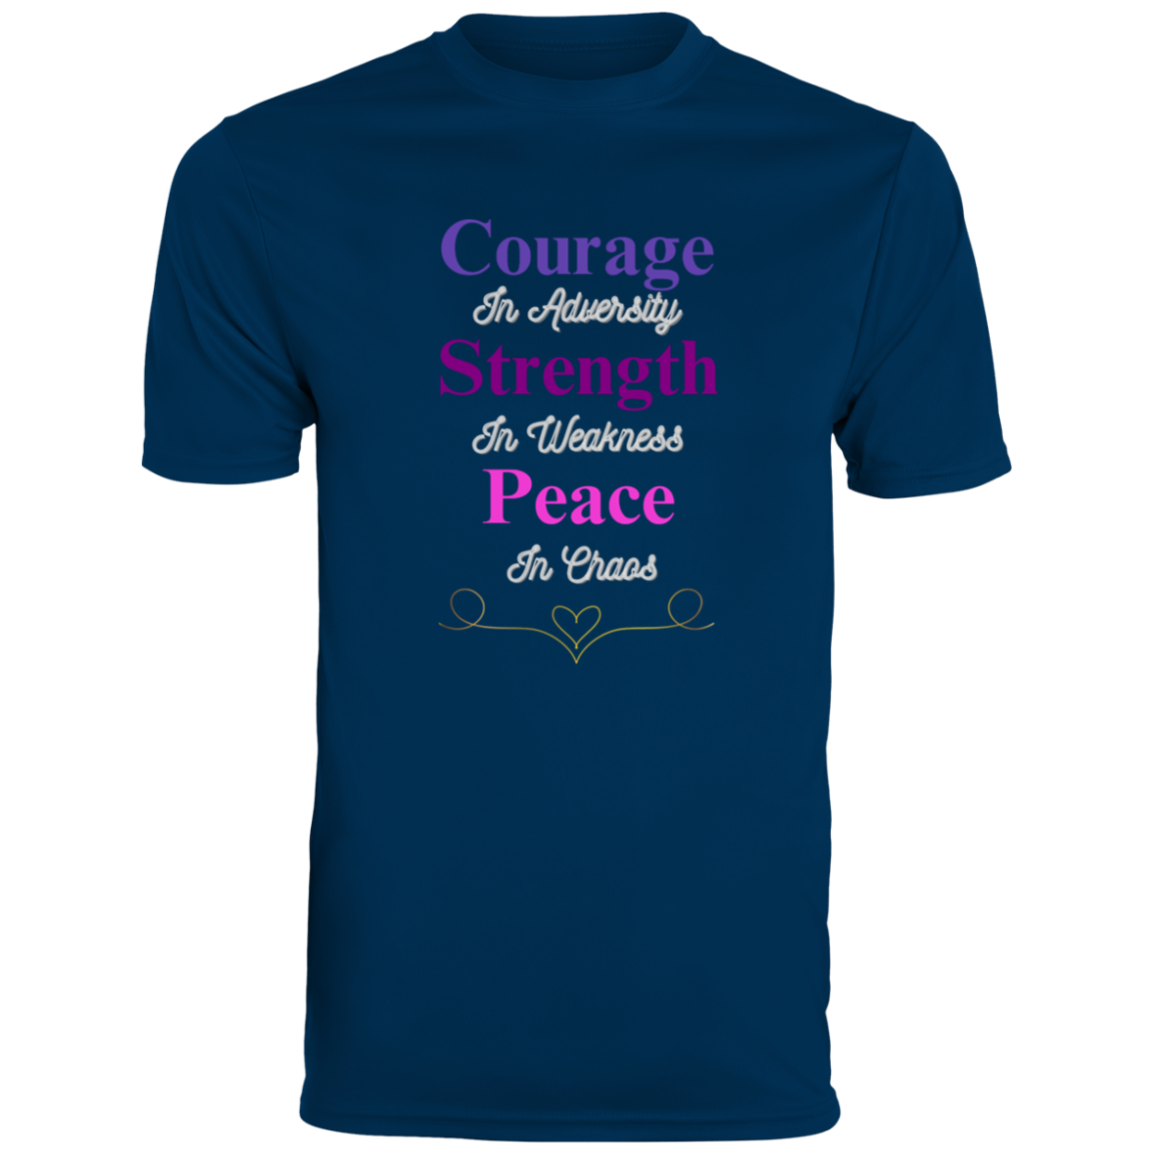 Courage In Adversity Men's T-Shirt| Men's Ultra-Breathable Moisture-Wicking Fabric T-Shirt| Short Sleeve